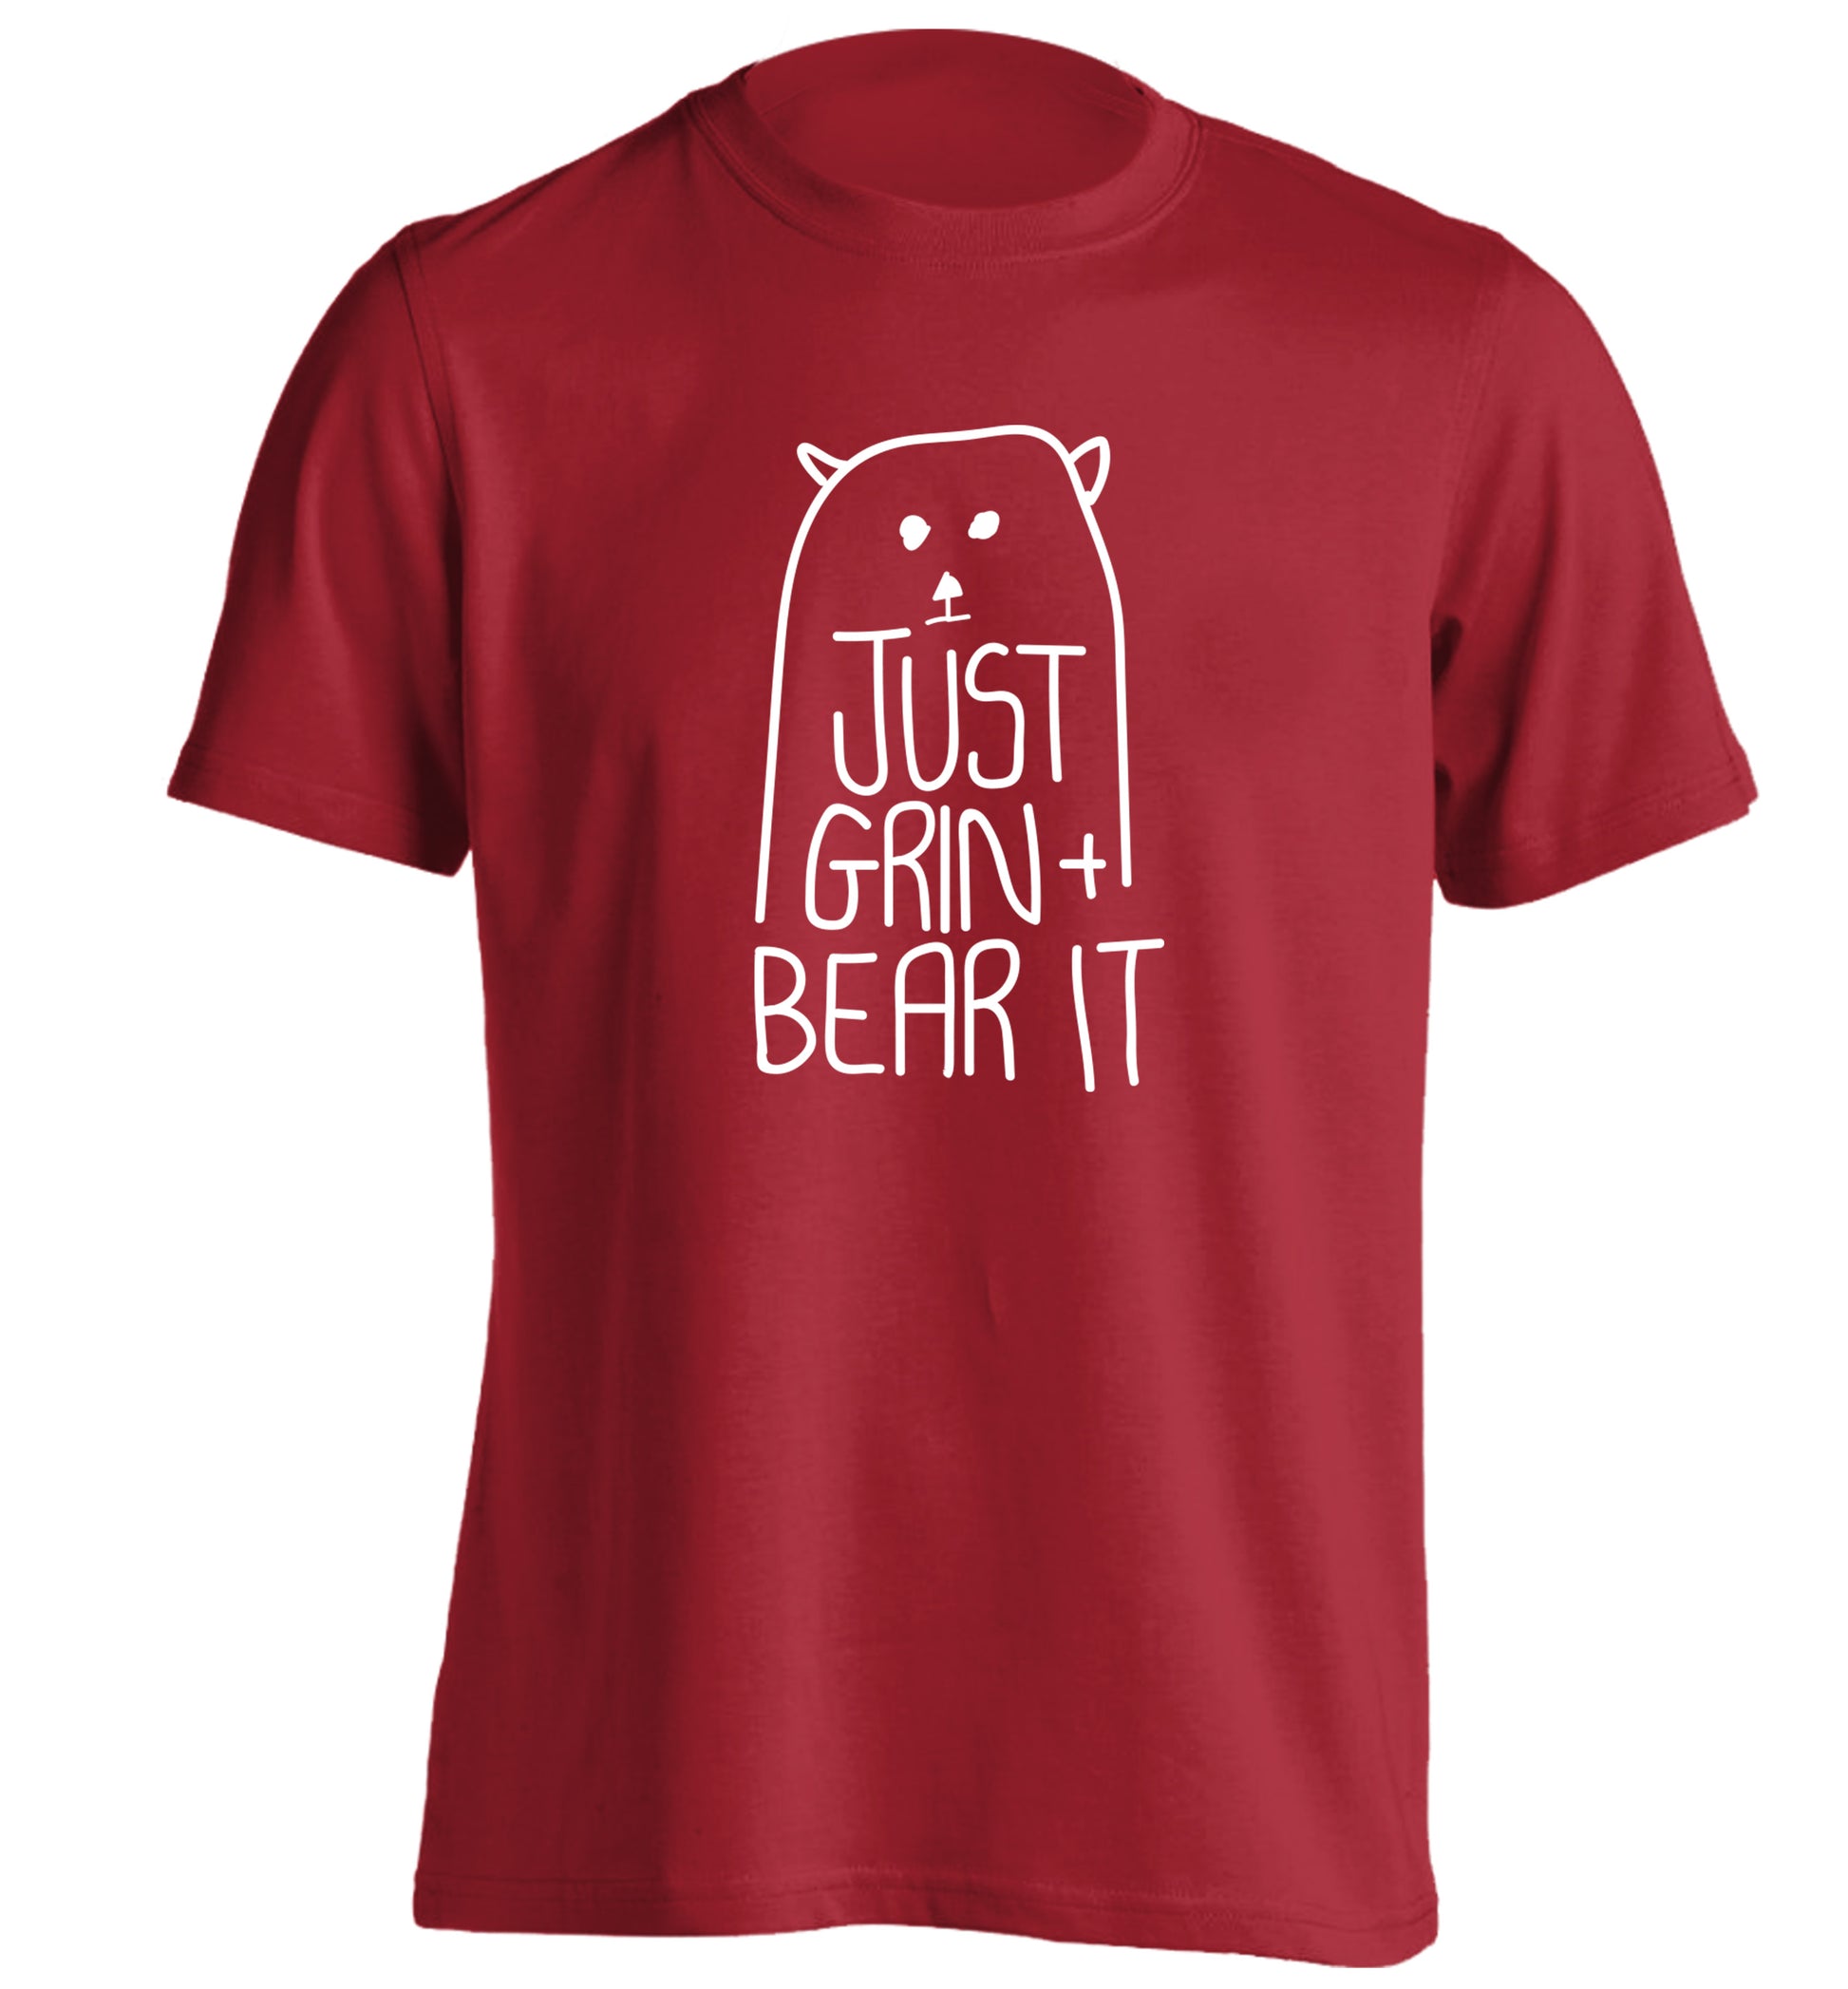 Just grin and bear it adults unisex red Tshirt 2XL